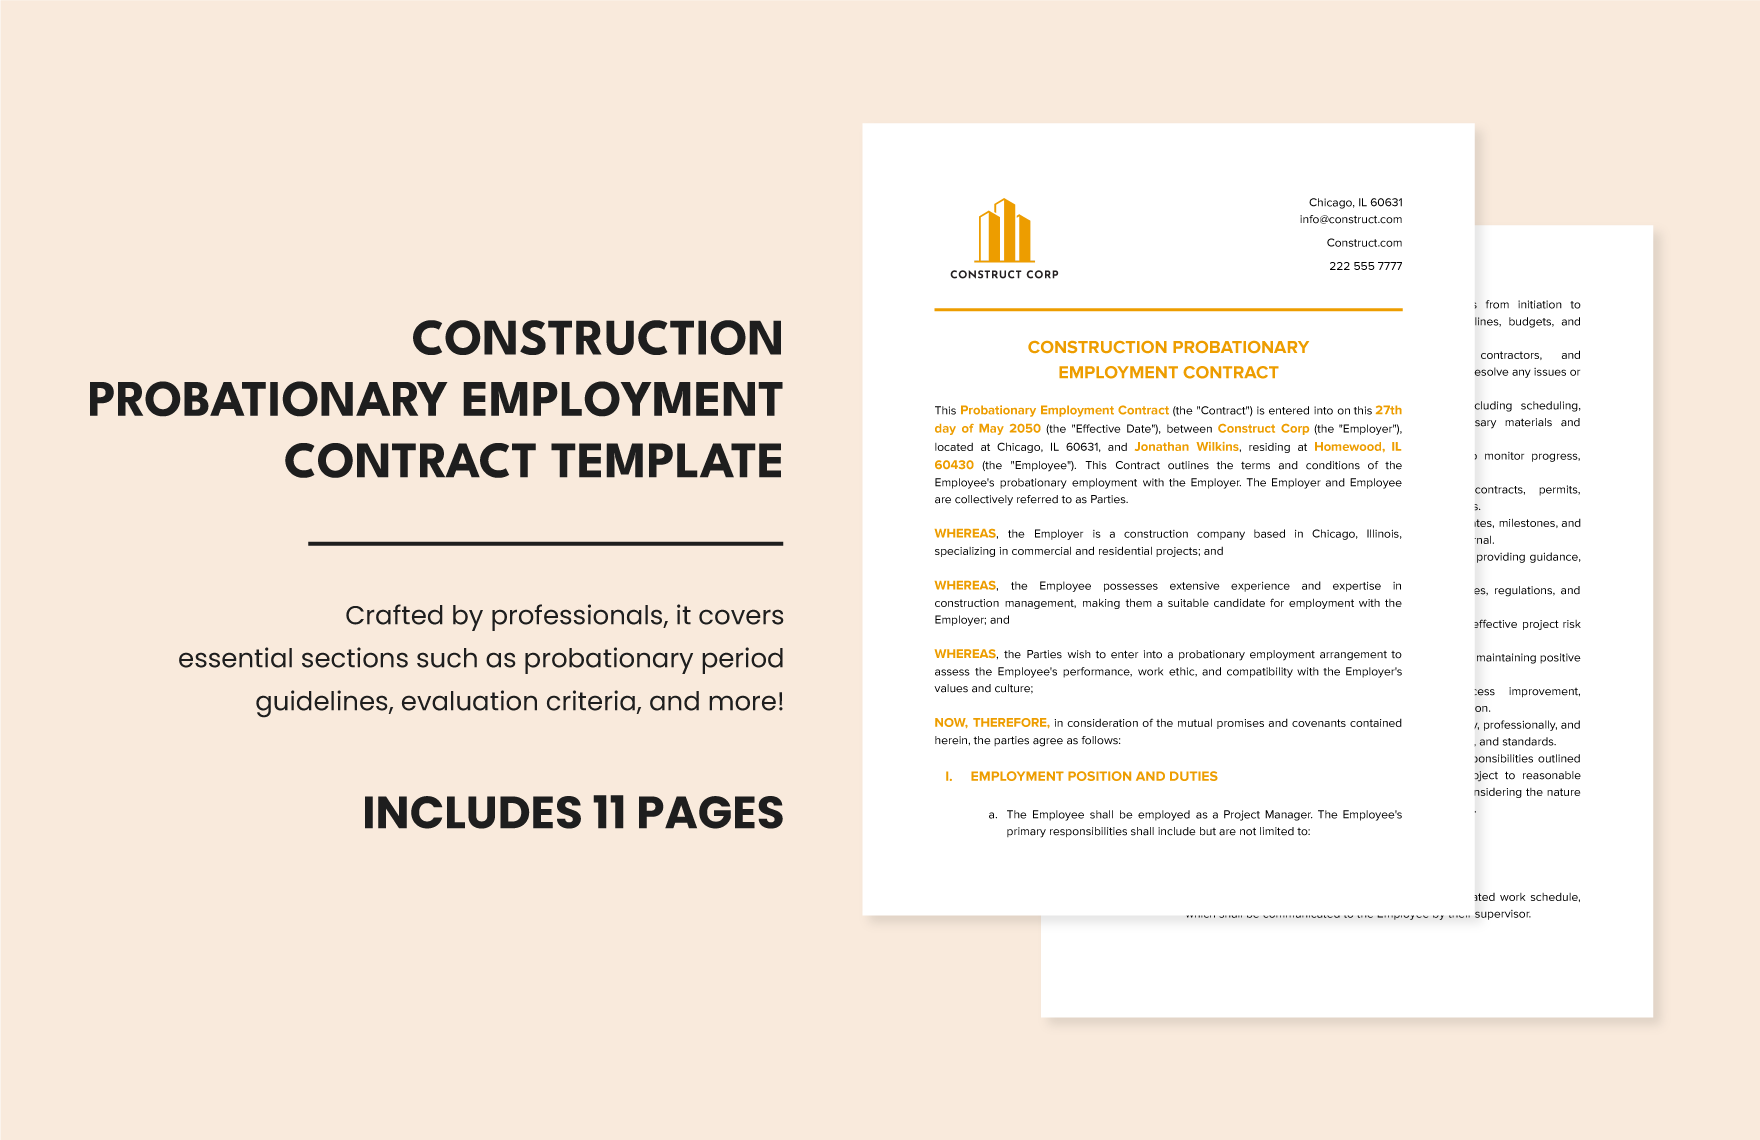 Construction Probationary Employment Contract Template